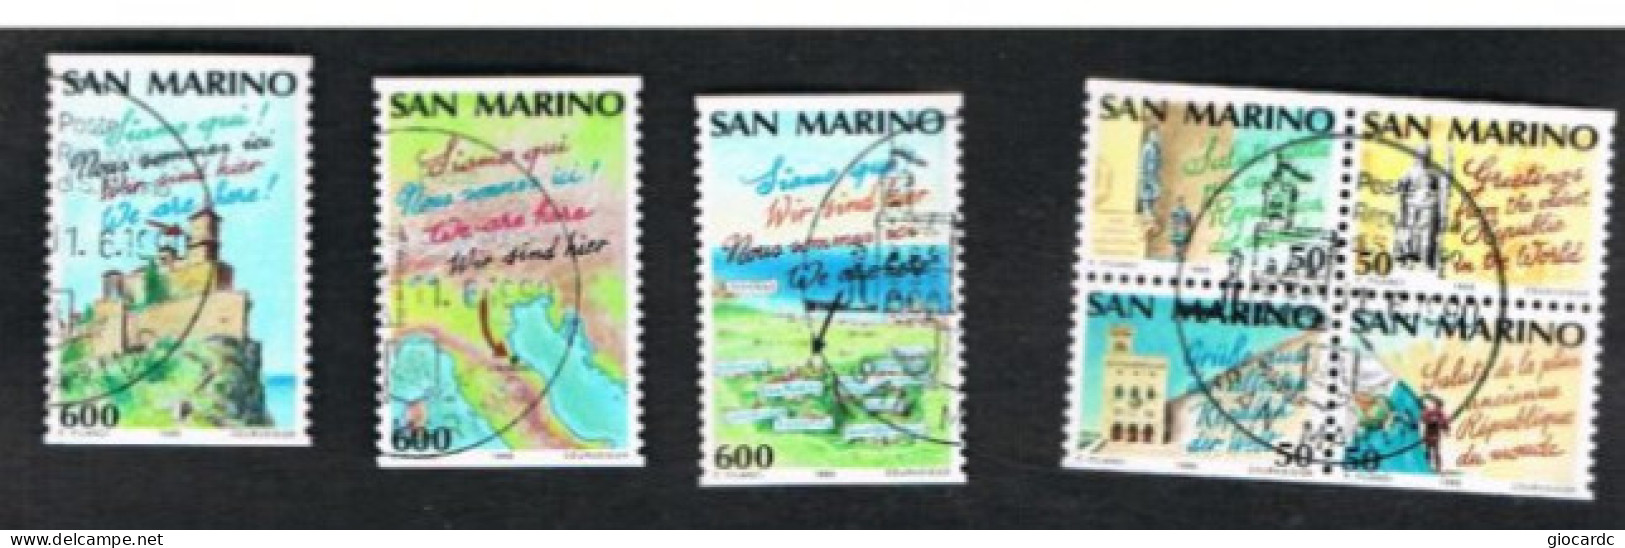 SAN MARINO UN 1289.1295  - 1990 ANNO DEL TURISMO (COMPLET SET OF 7 STAMPS, 4 SE-TENANT - BY BOOKLET)  - USED - Gebruikt